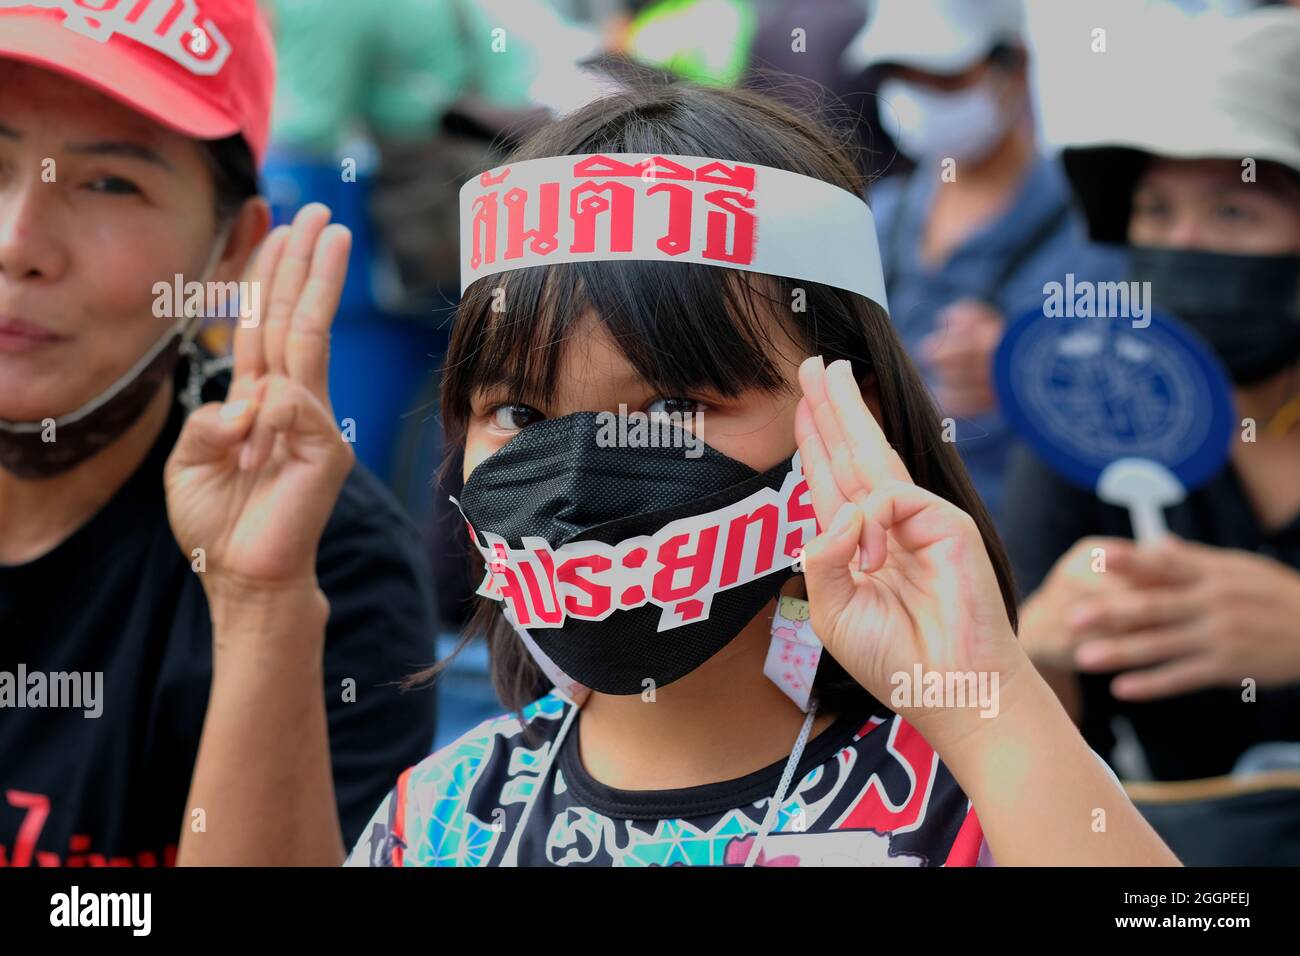 Bangkok, Thailand, 2 September 2021, a girl gives the three finger salute as part of a protest demanding the resignation of Prime Minister General Prayut Chan-ocha. The protests are part of an ongoing series across Bangkok to voice disaffection with the current government's performance during the COVID pandemic. Credit: James Patrick/Alamy Live News Stock Photo